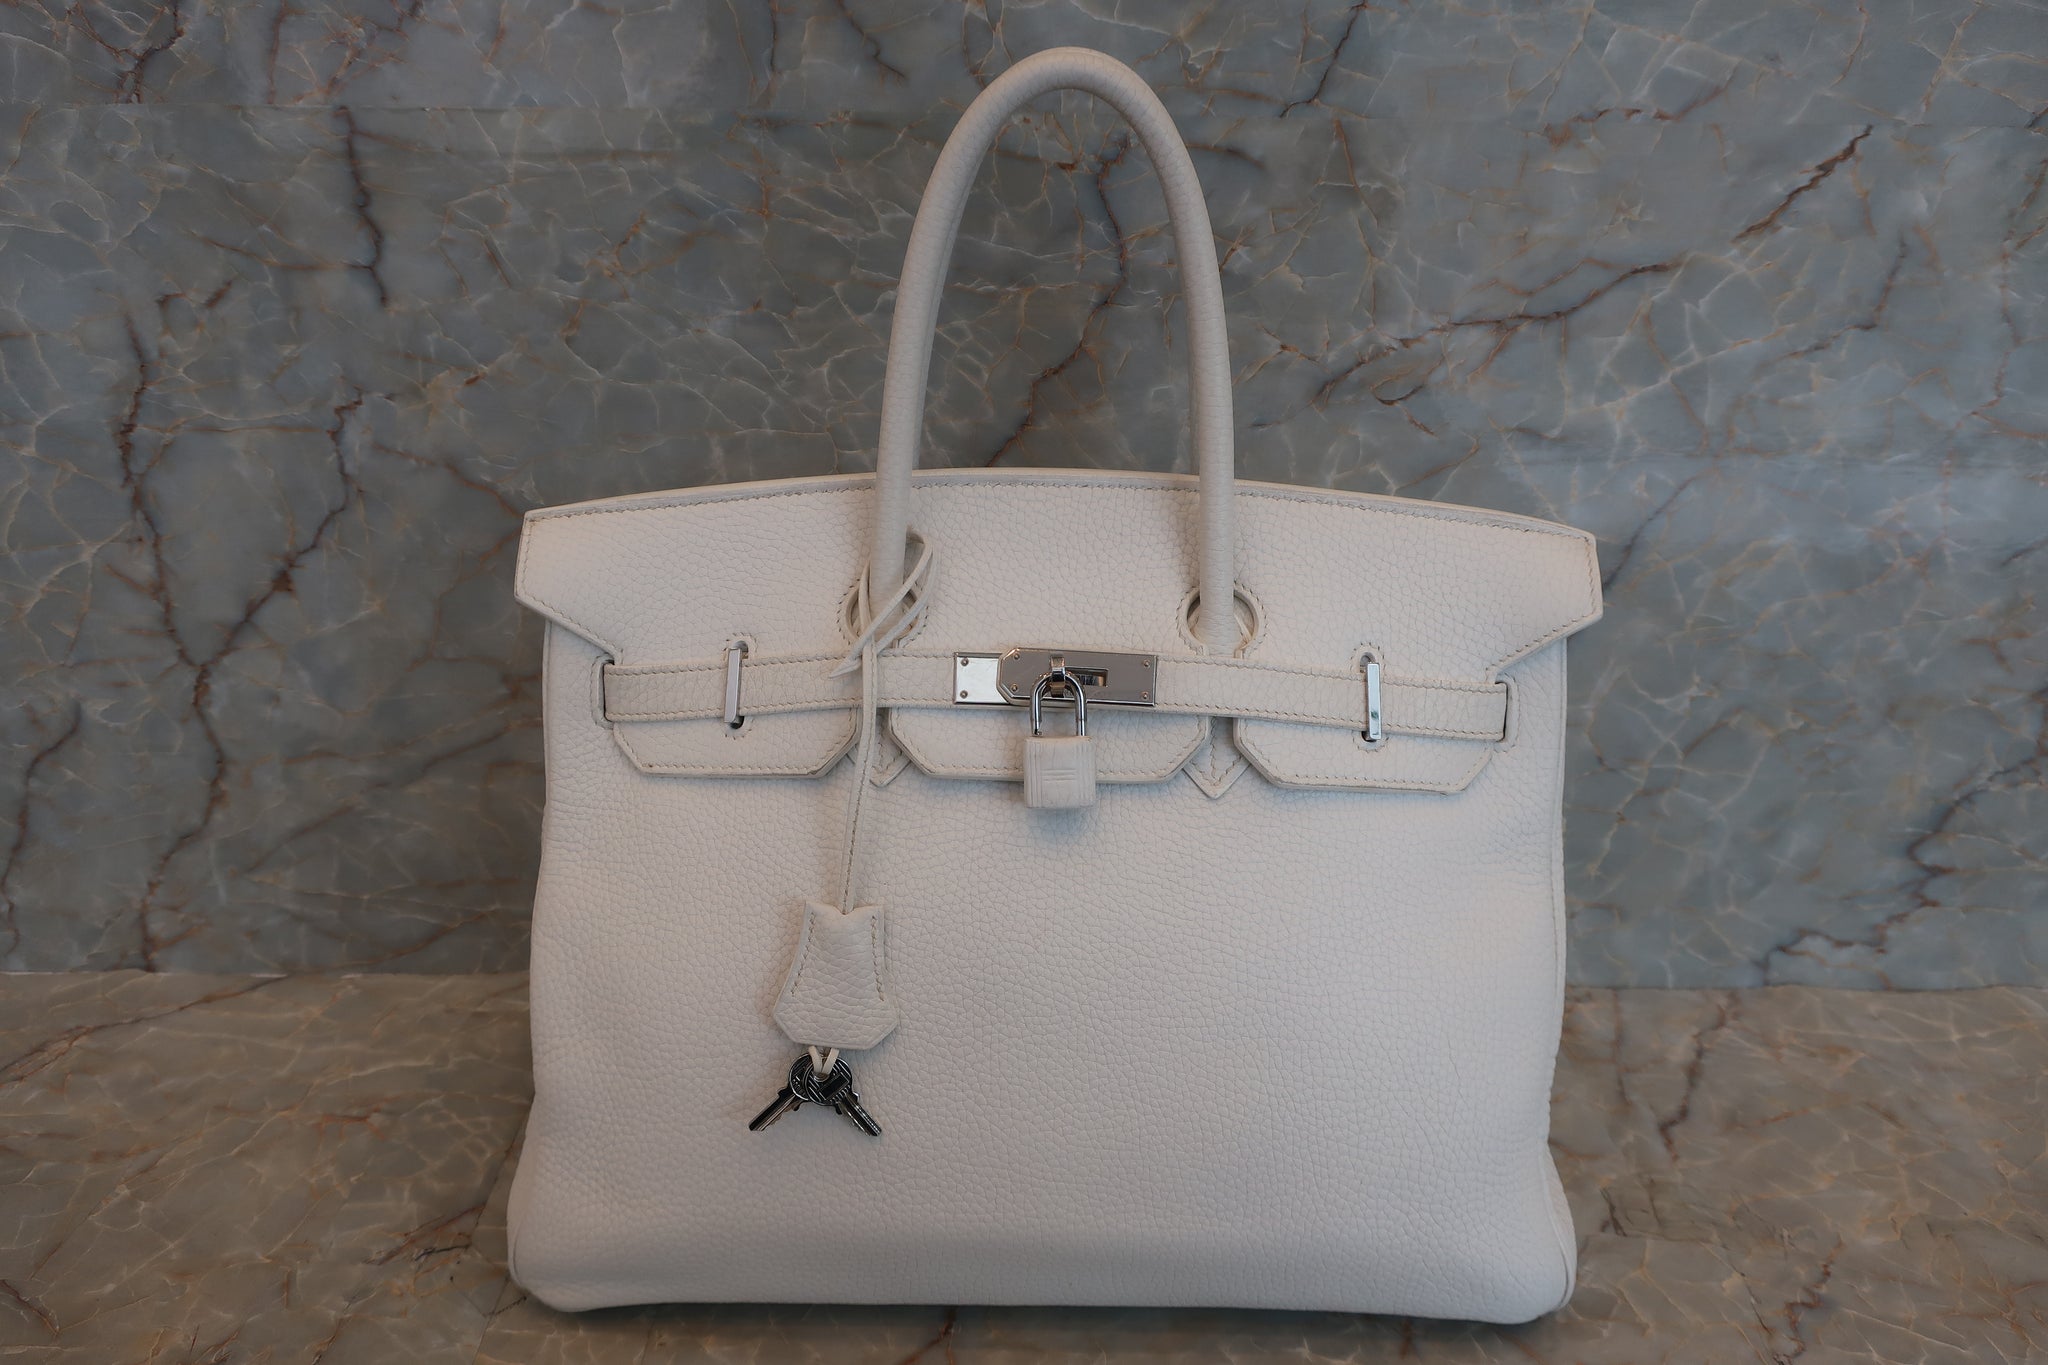 Hermes Birkin 35 Bag White Clemence Leather with Gold Hardware